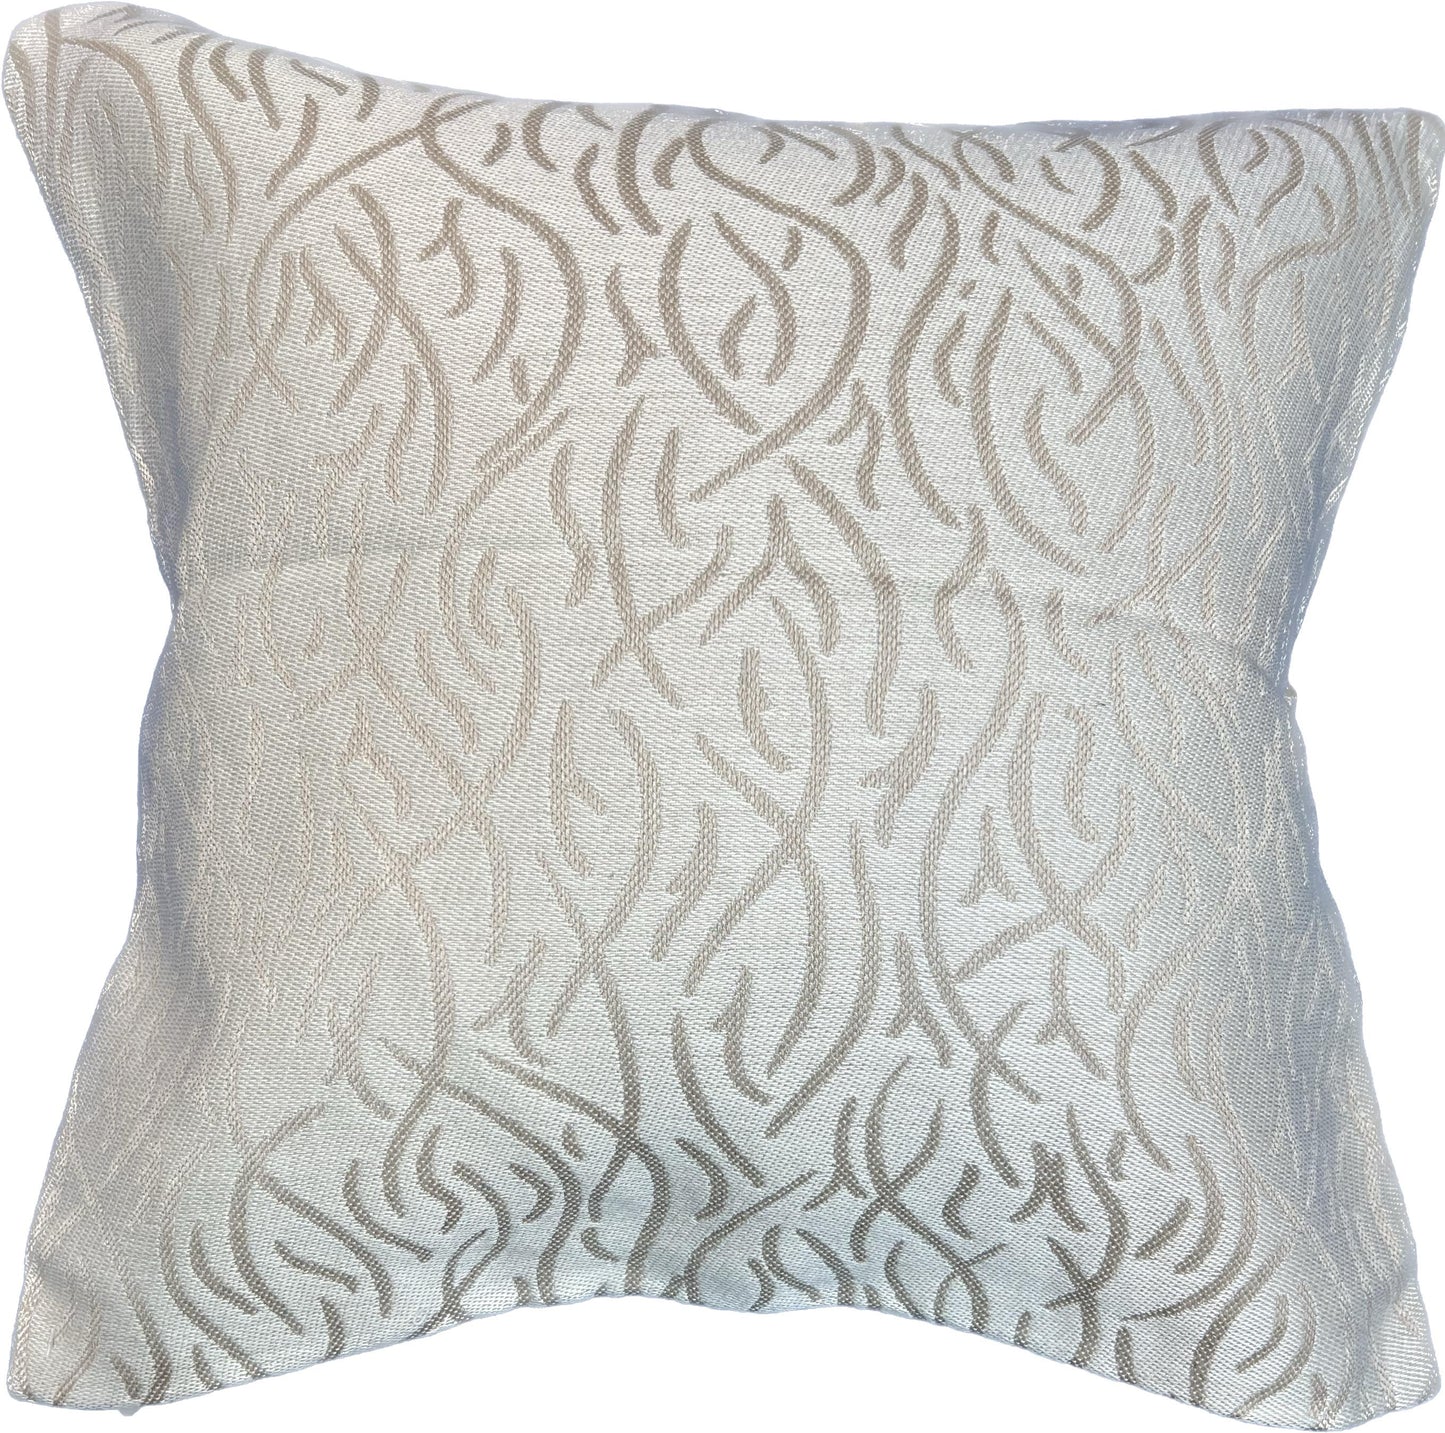 18"x18"  Tone on Tone Pillow Cover